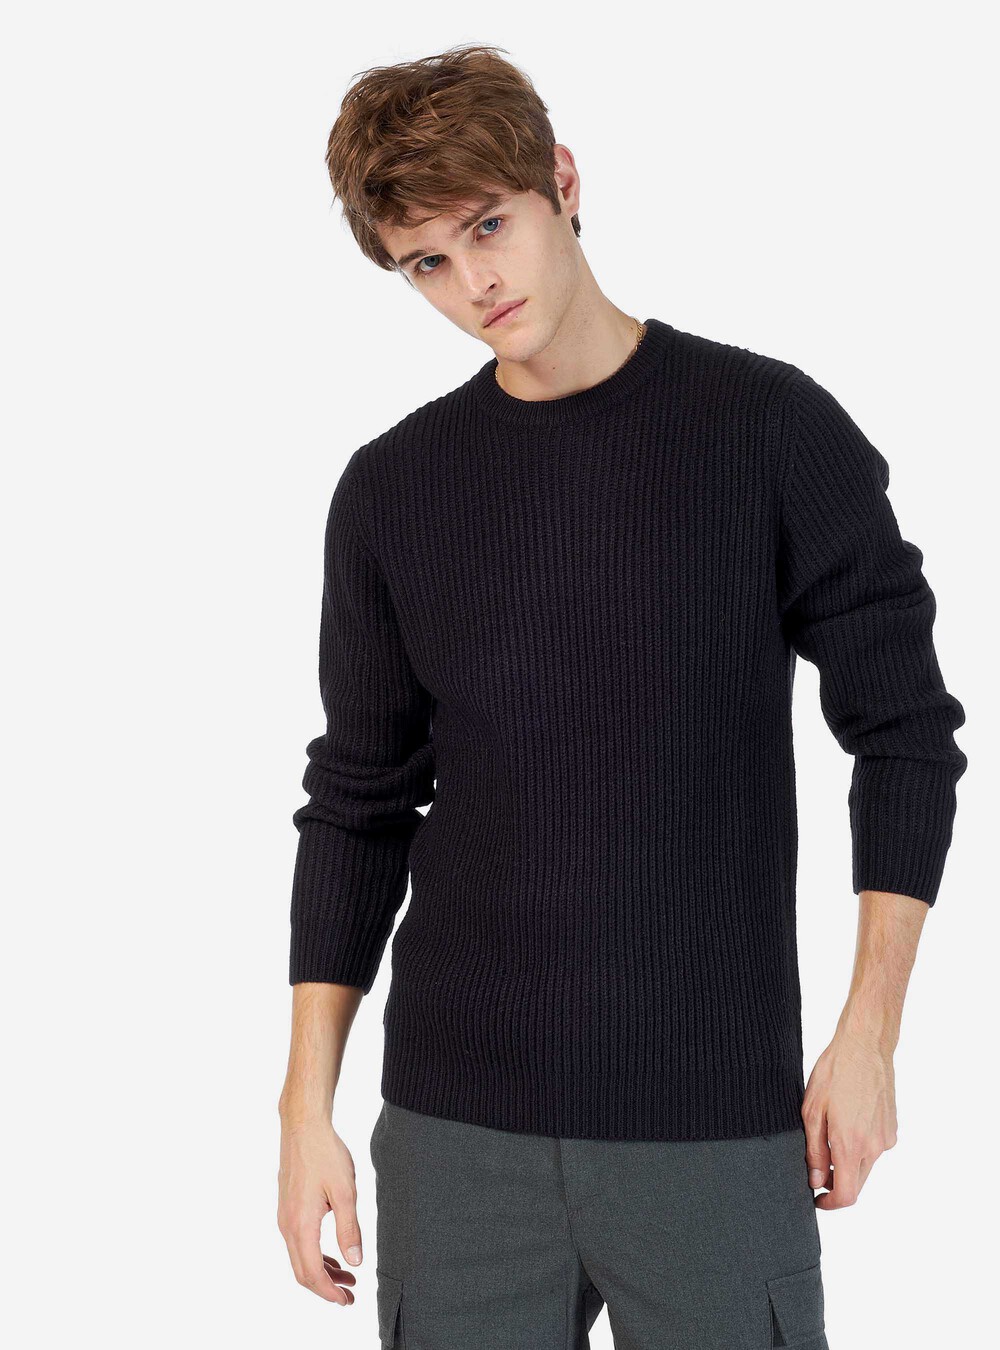 English ribbed pullover in wool blend